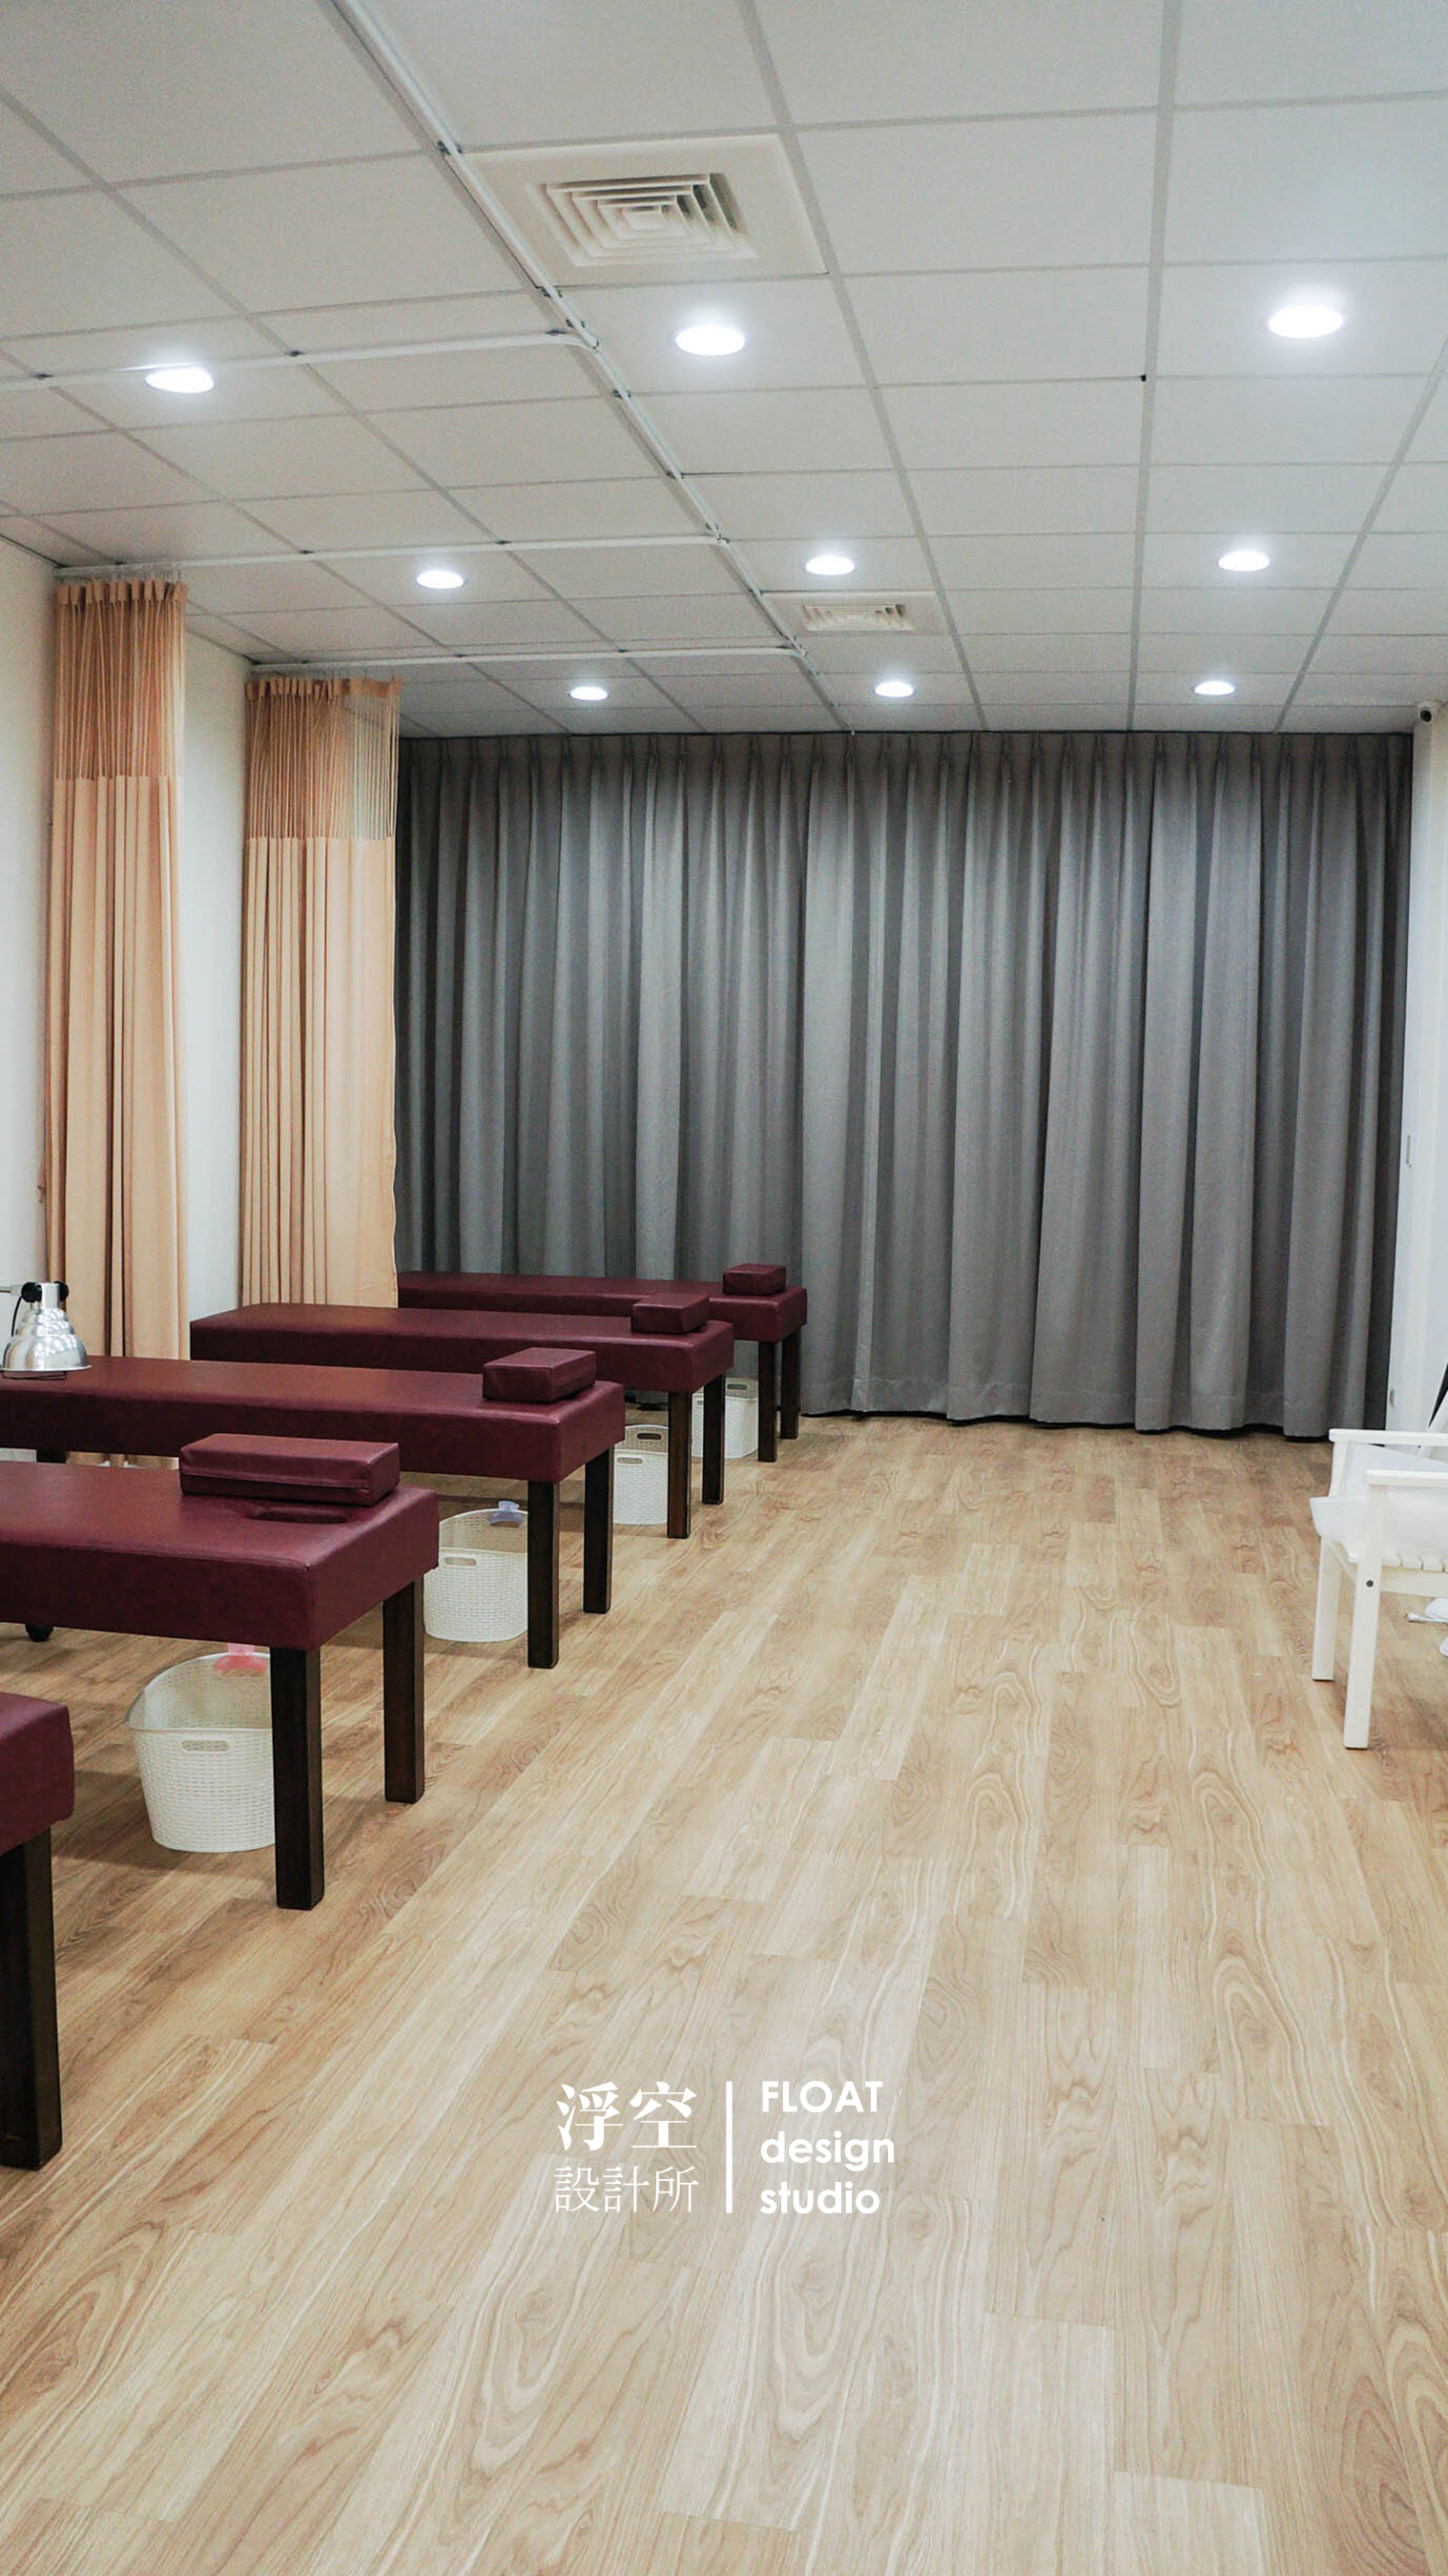 Float design Chinese medicine clinic (6)